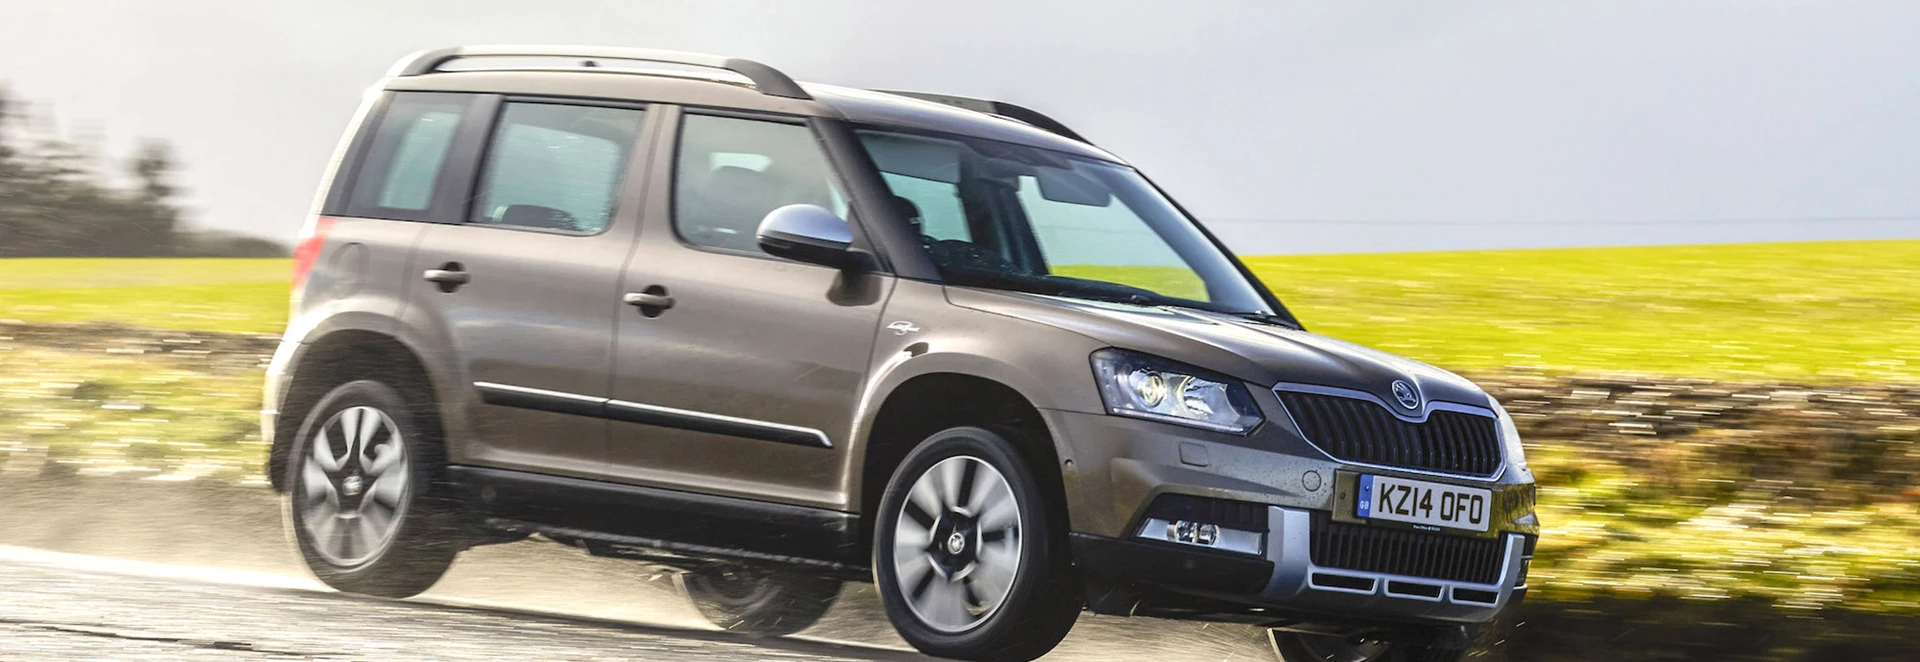 UK's Most reliable SUVs revealed